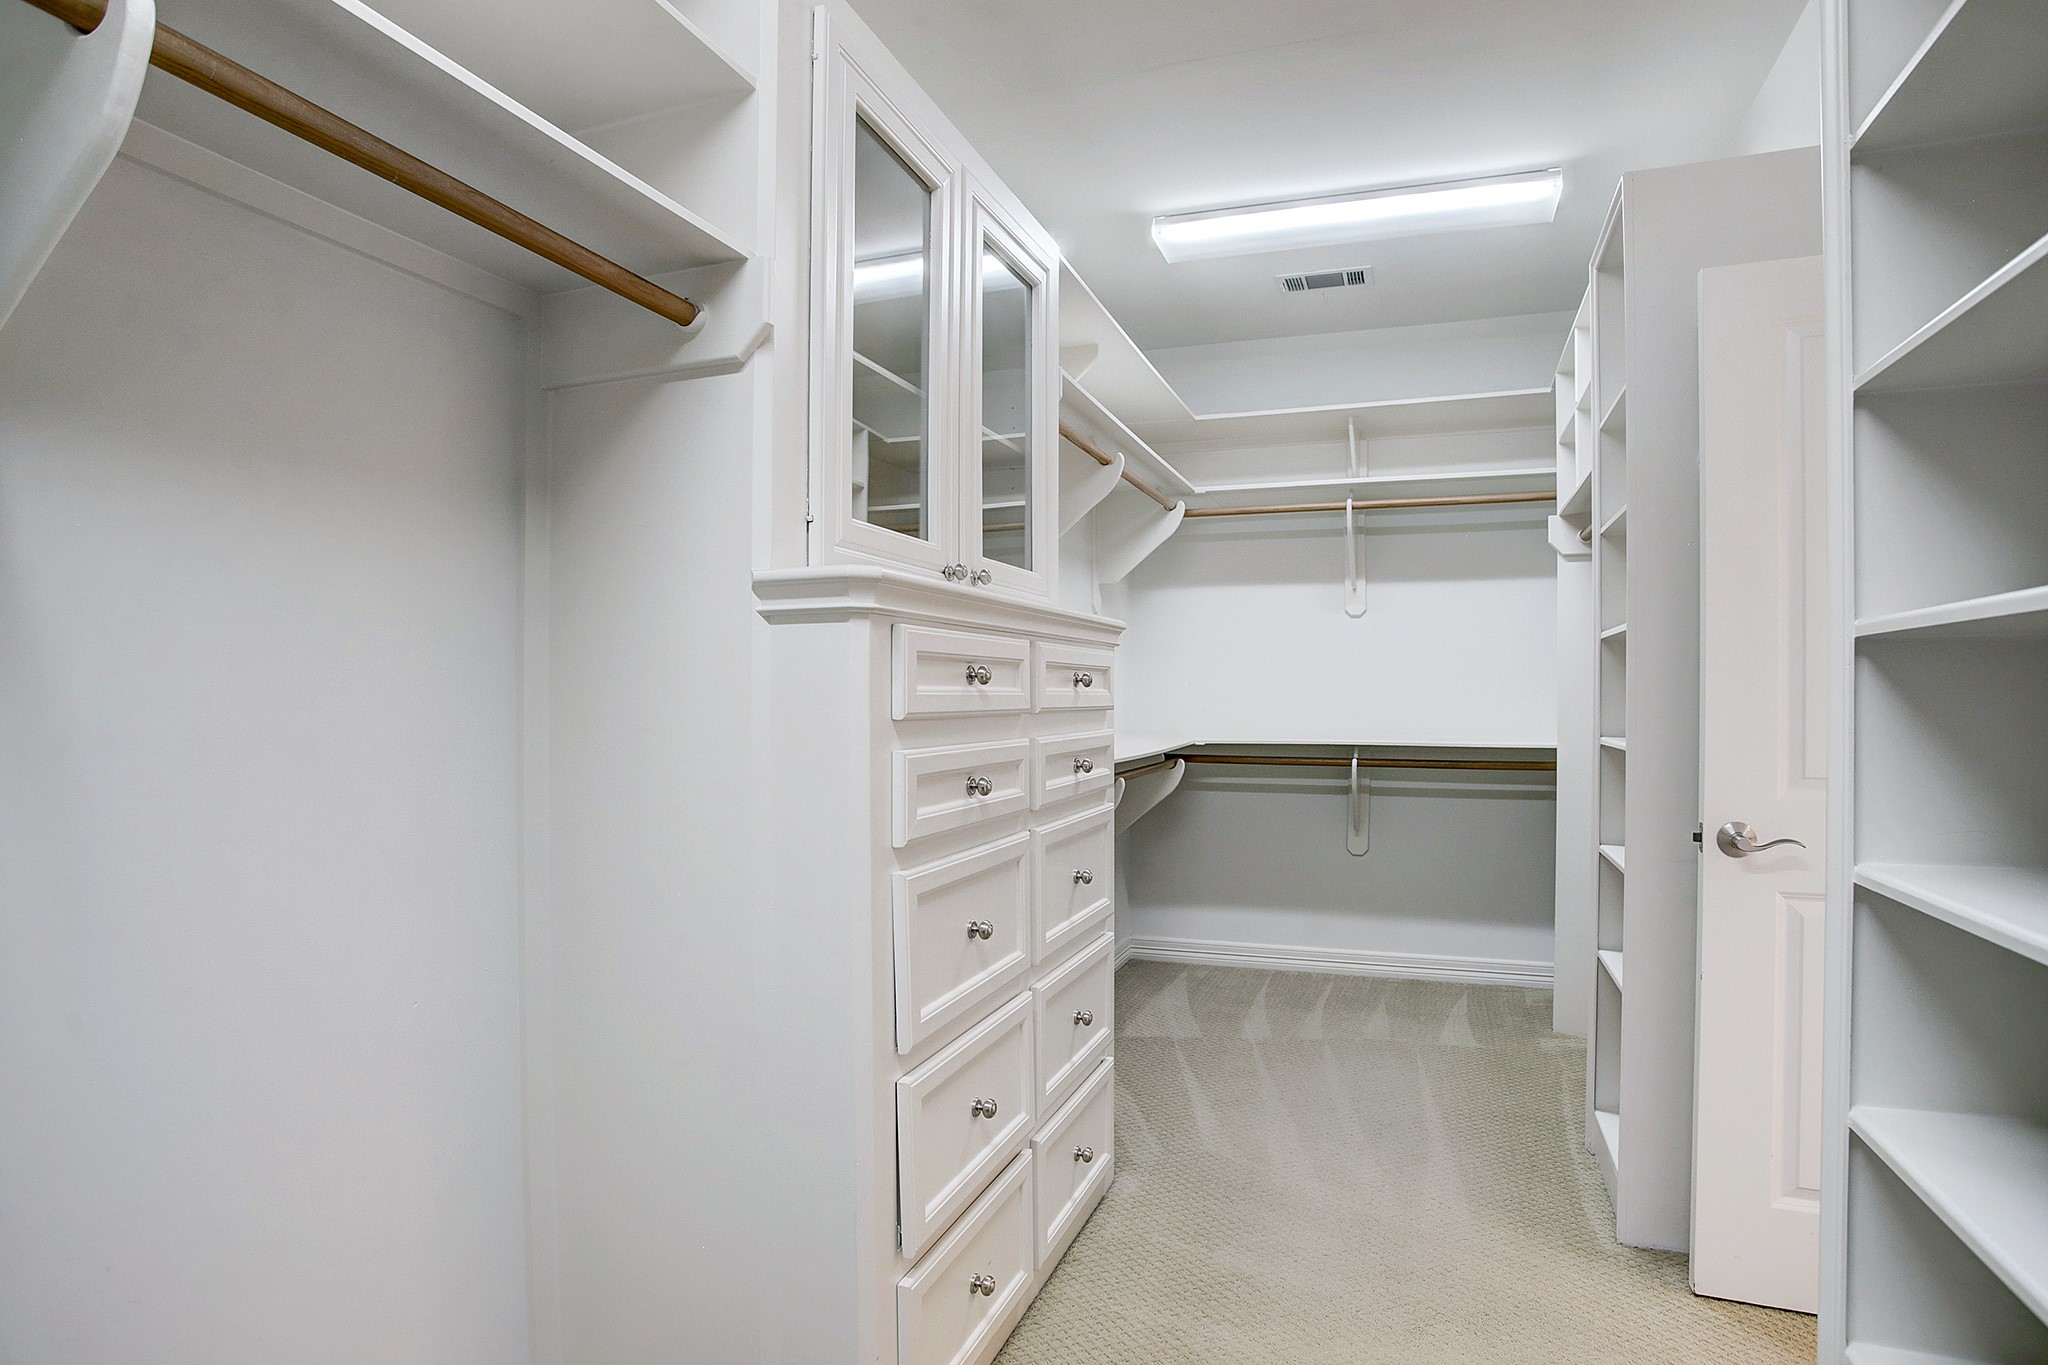 PRIMARY CLOSET-  A huge closet with custom built-in drawers, cabinets and shelves is adjacent to the primary bath.